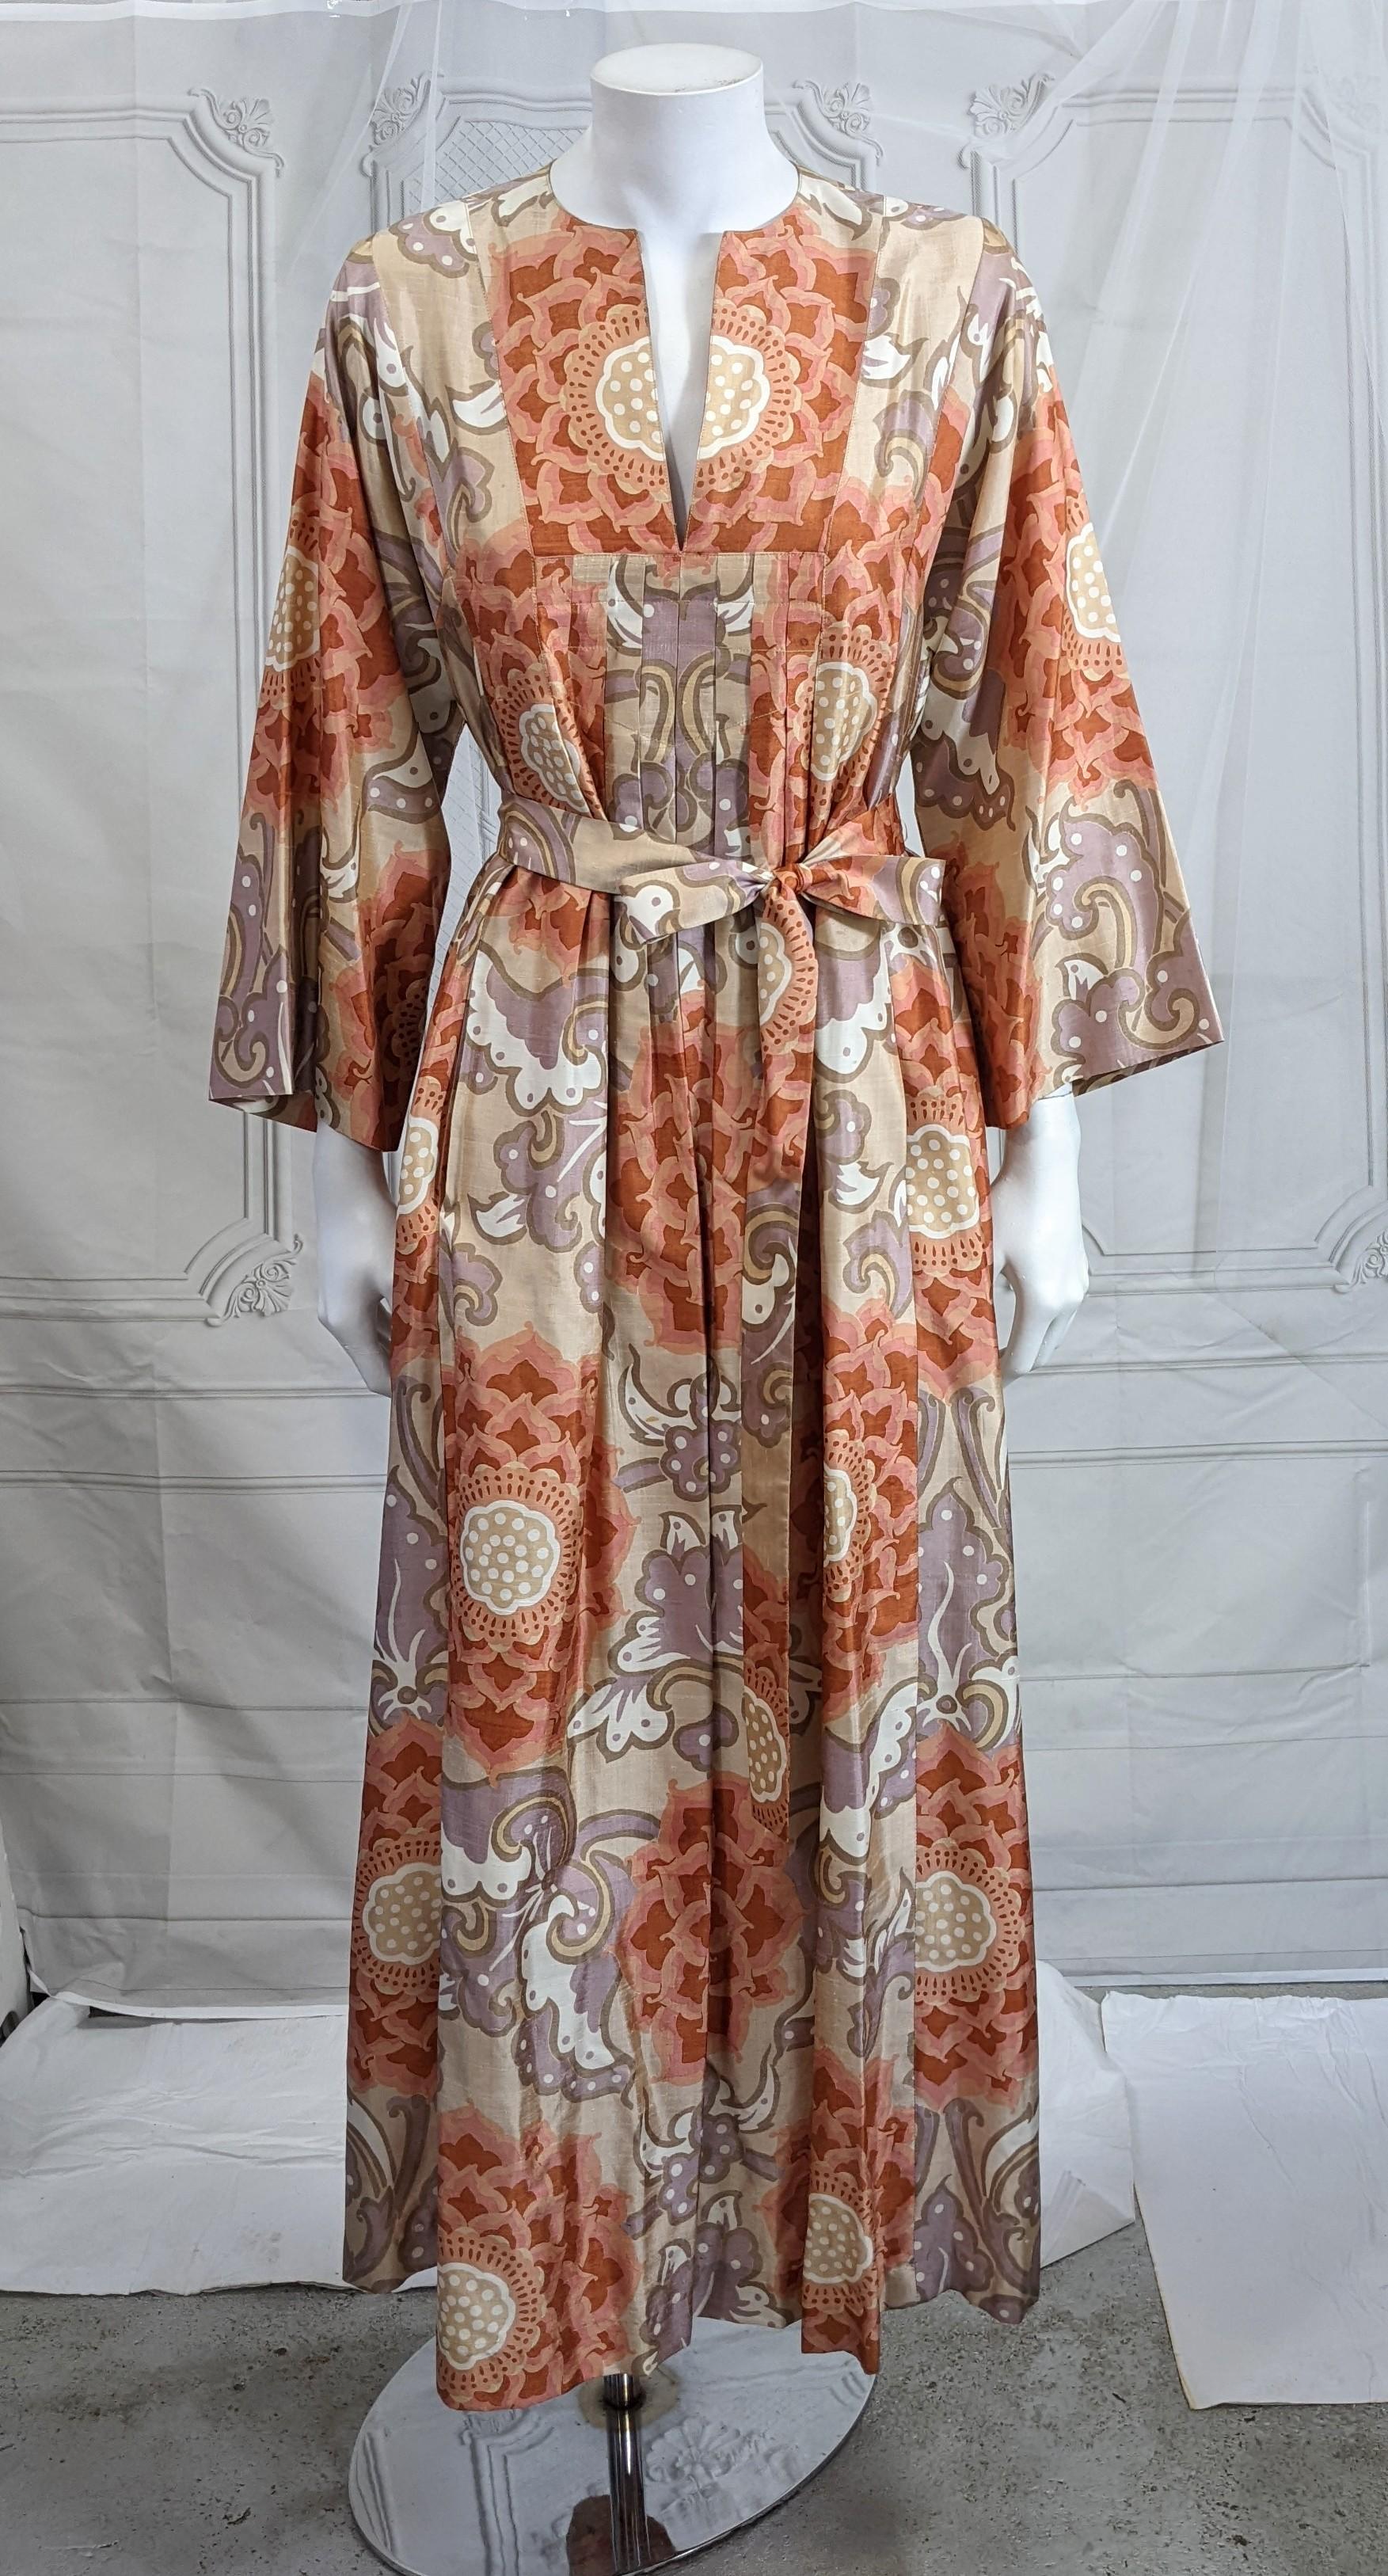 Thai Silk Lotus Print Resort Dress In Excellent Condition For Sale In New York, NY